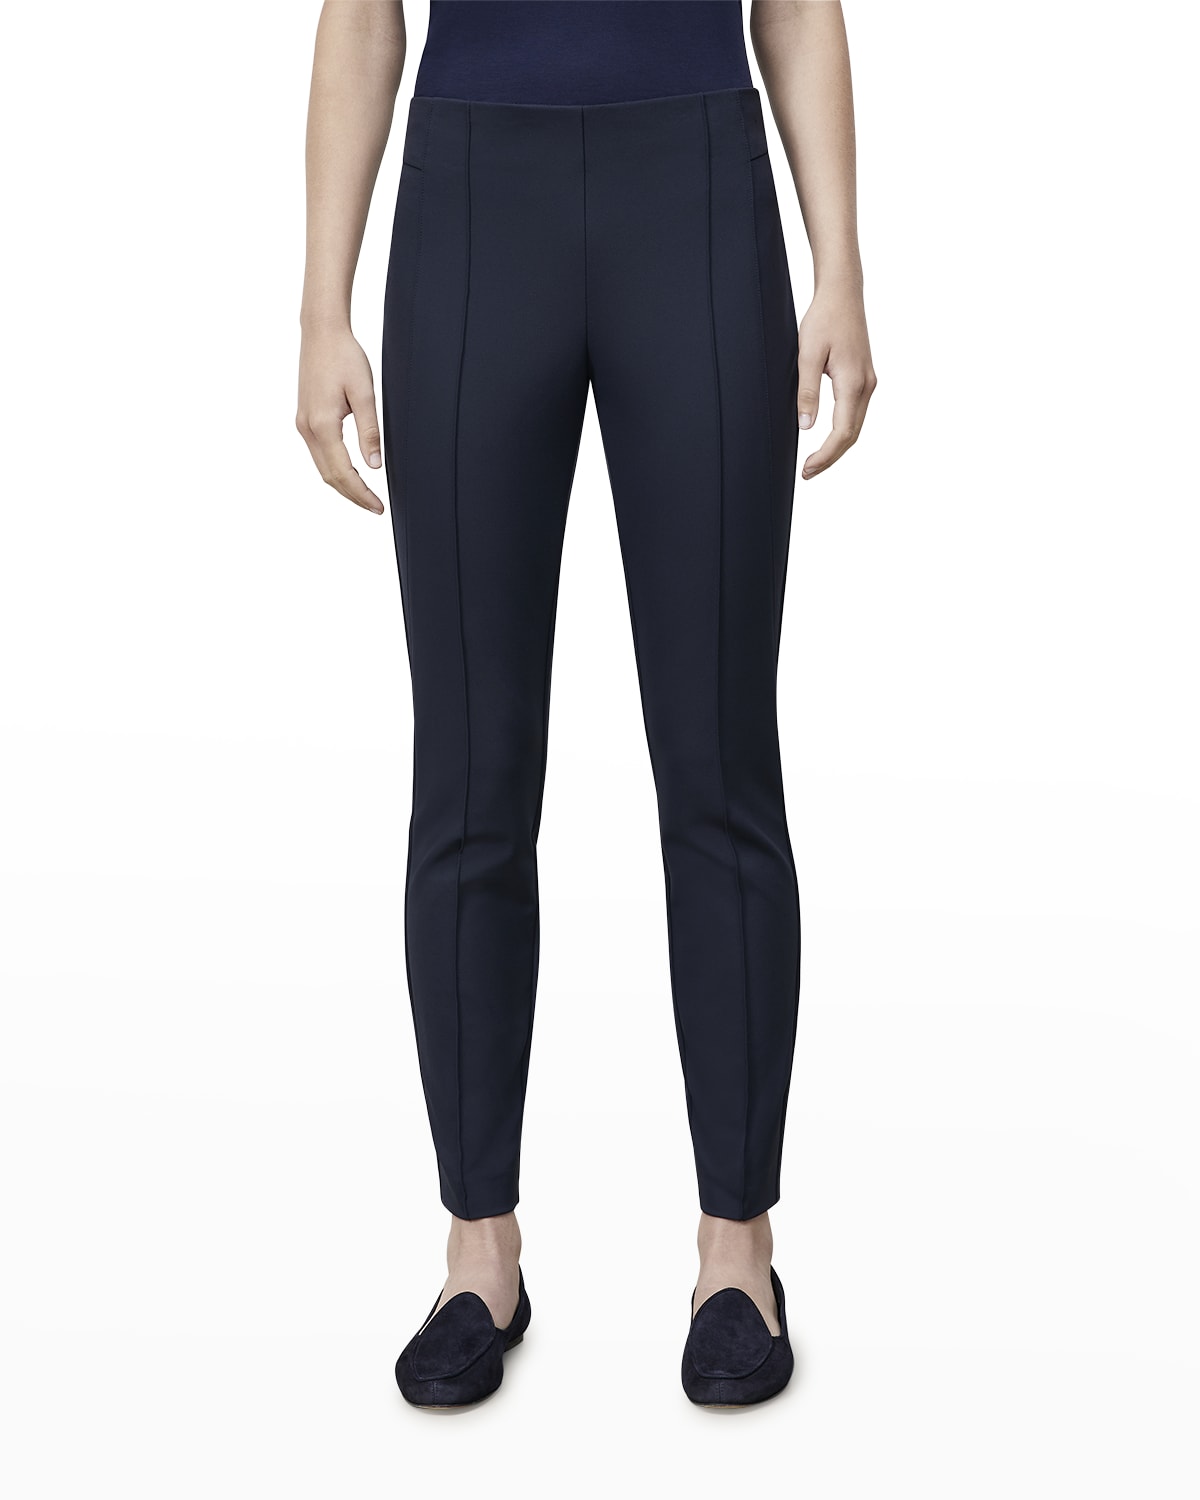 Shop Lafayette 148 Petite Gramercy Acclaimed Stretch Pants In Ink